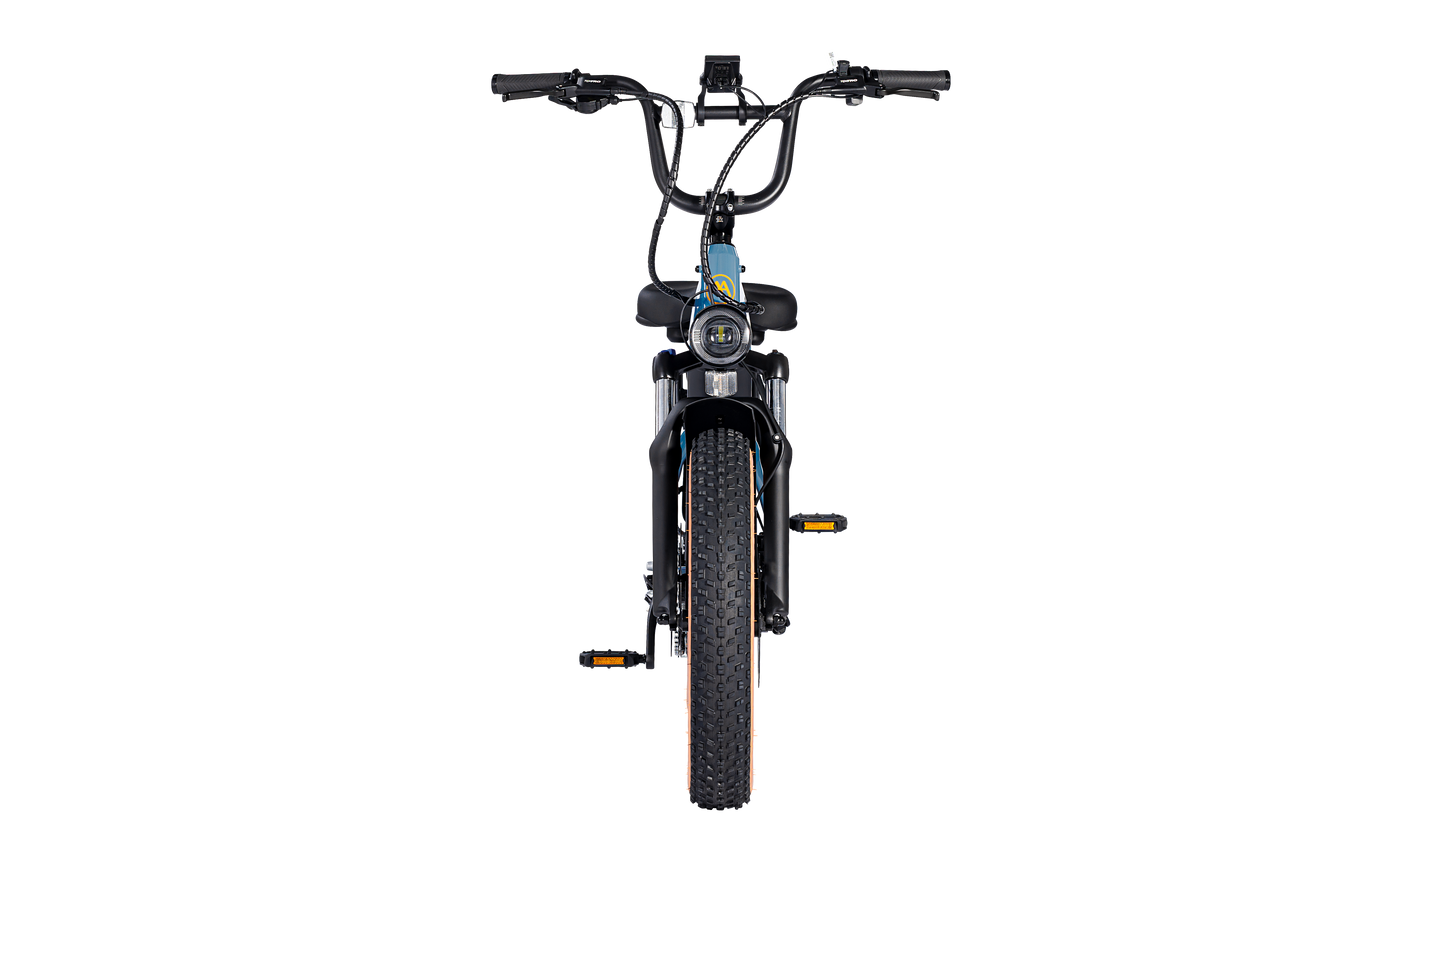 Front view of a black AIMA - Big Sur Sport electric bicycle with a large headlight, wide handlebars, and fat tires, boasting a class 2/3 rating.